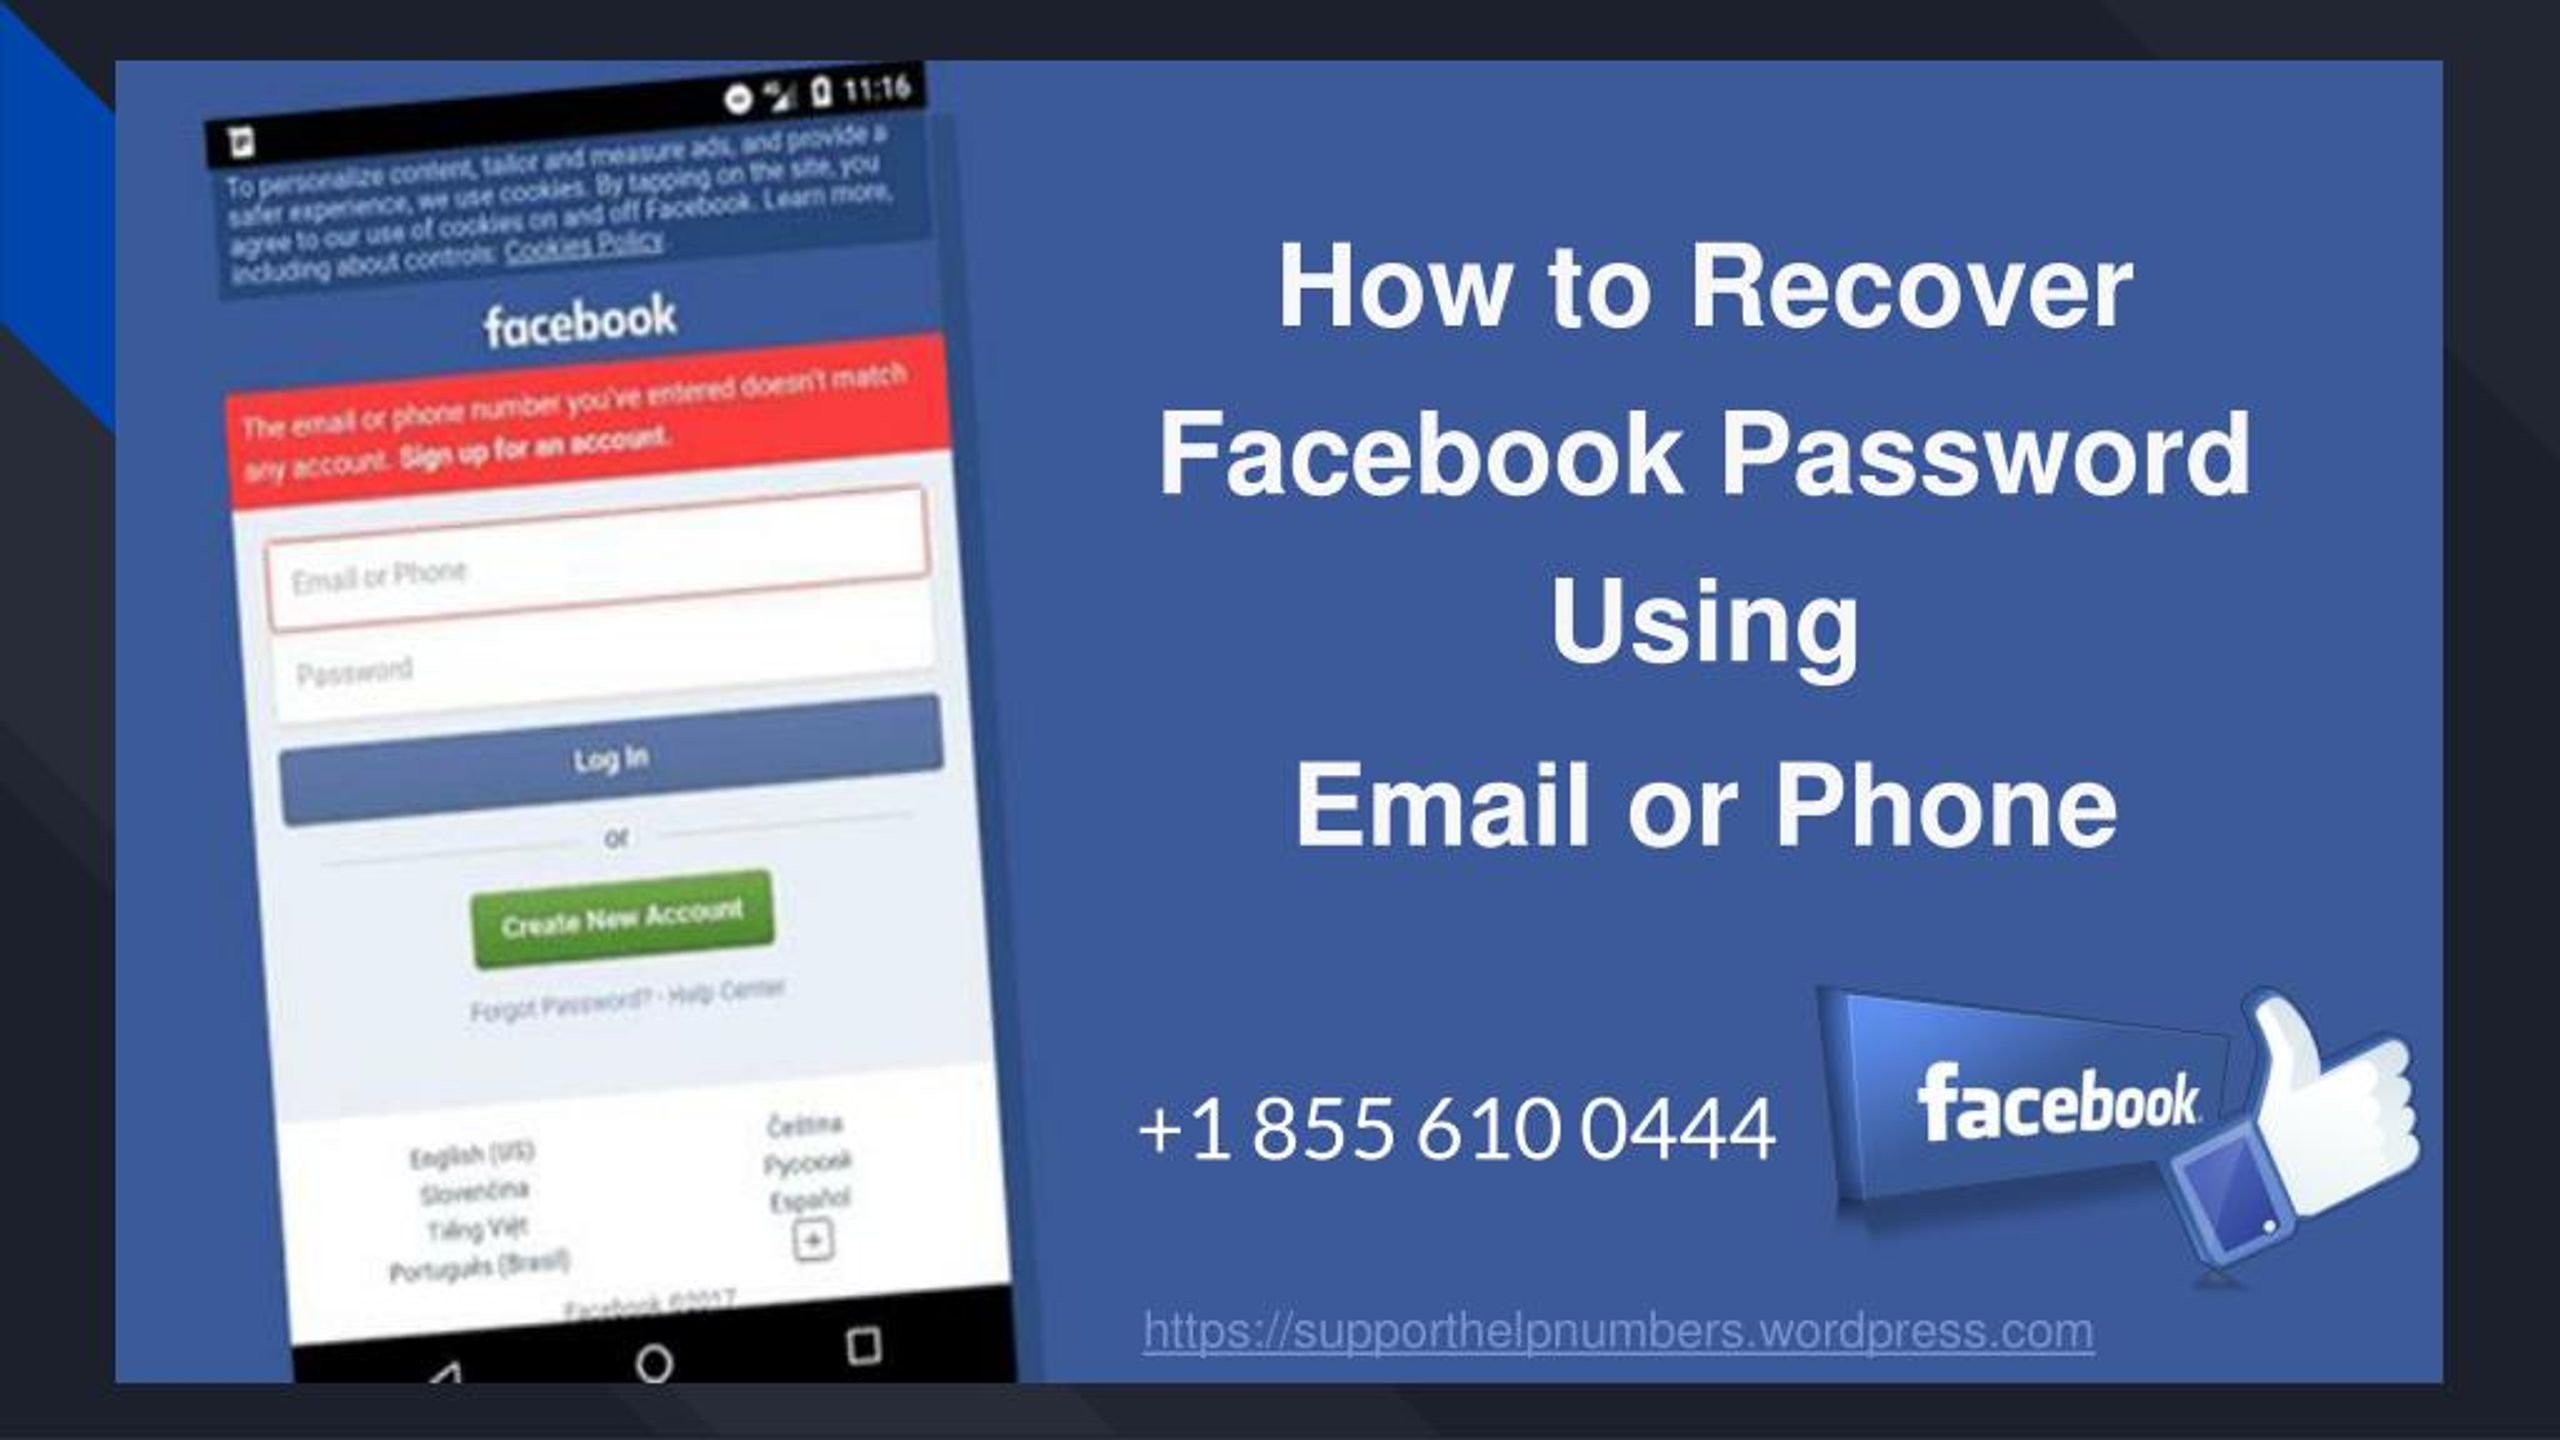 how can i recover my facebook password without mobile number